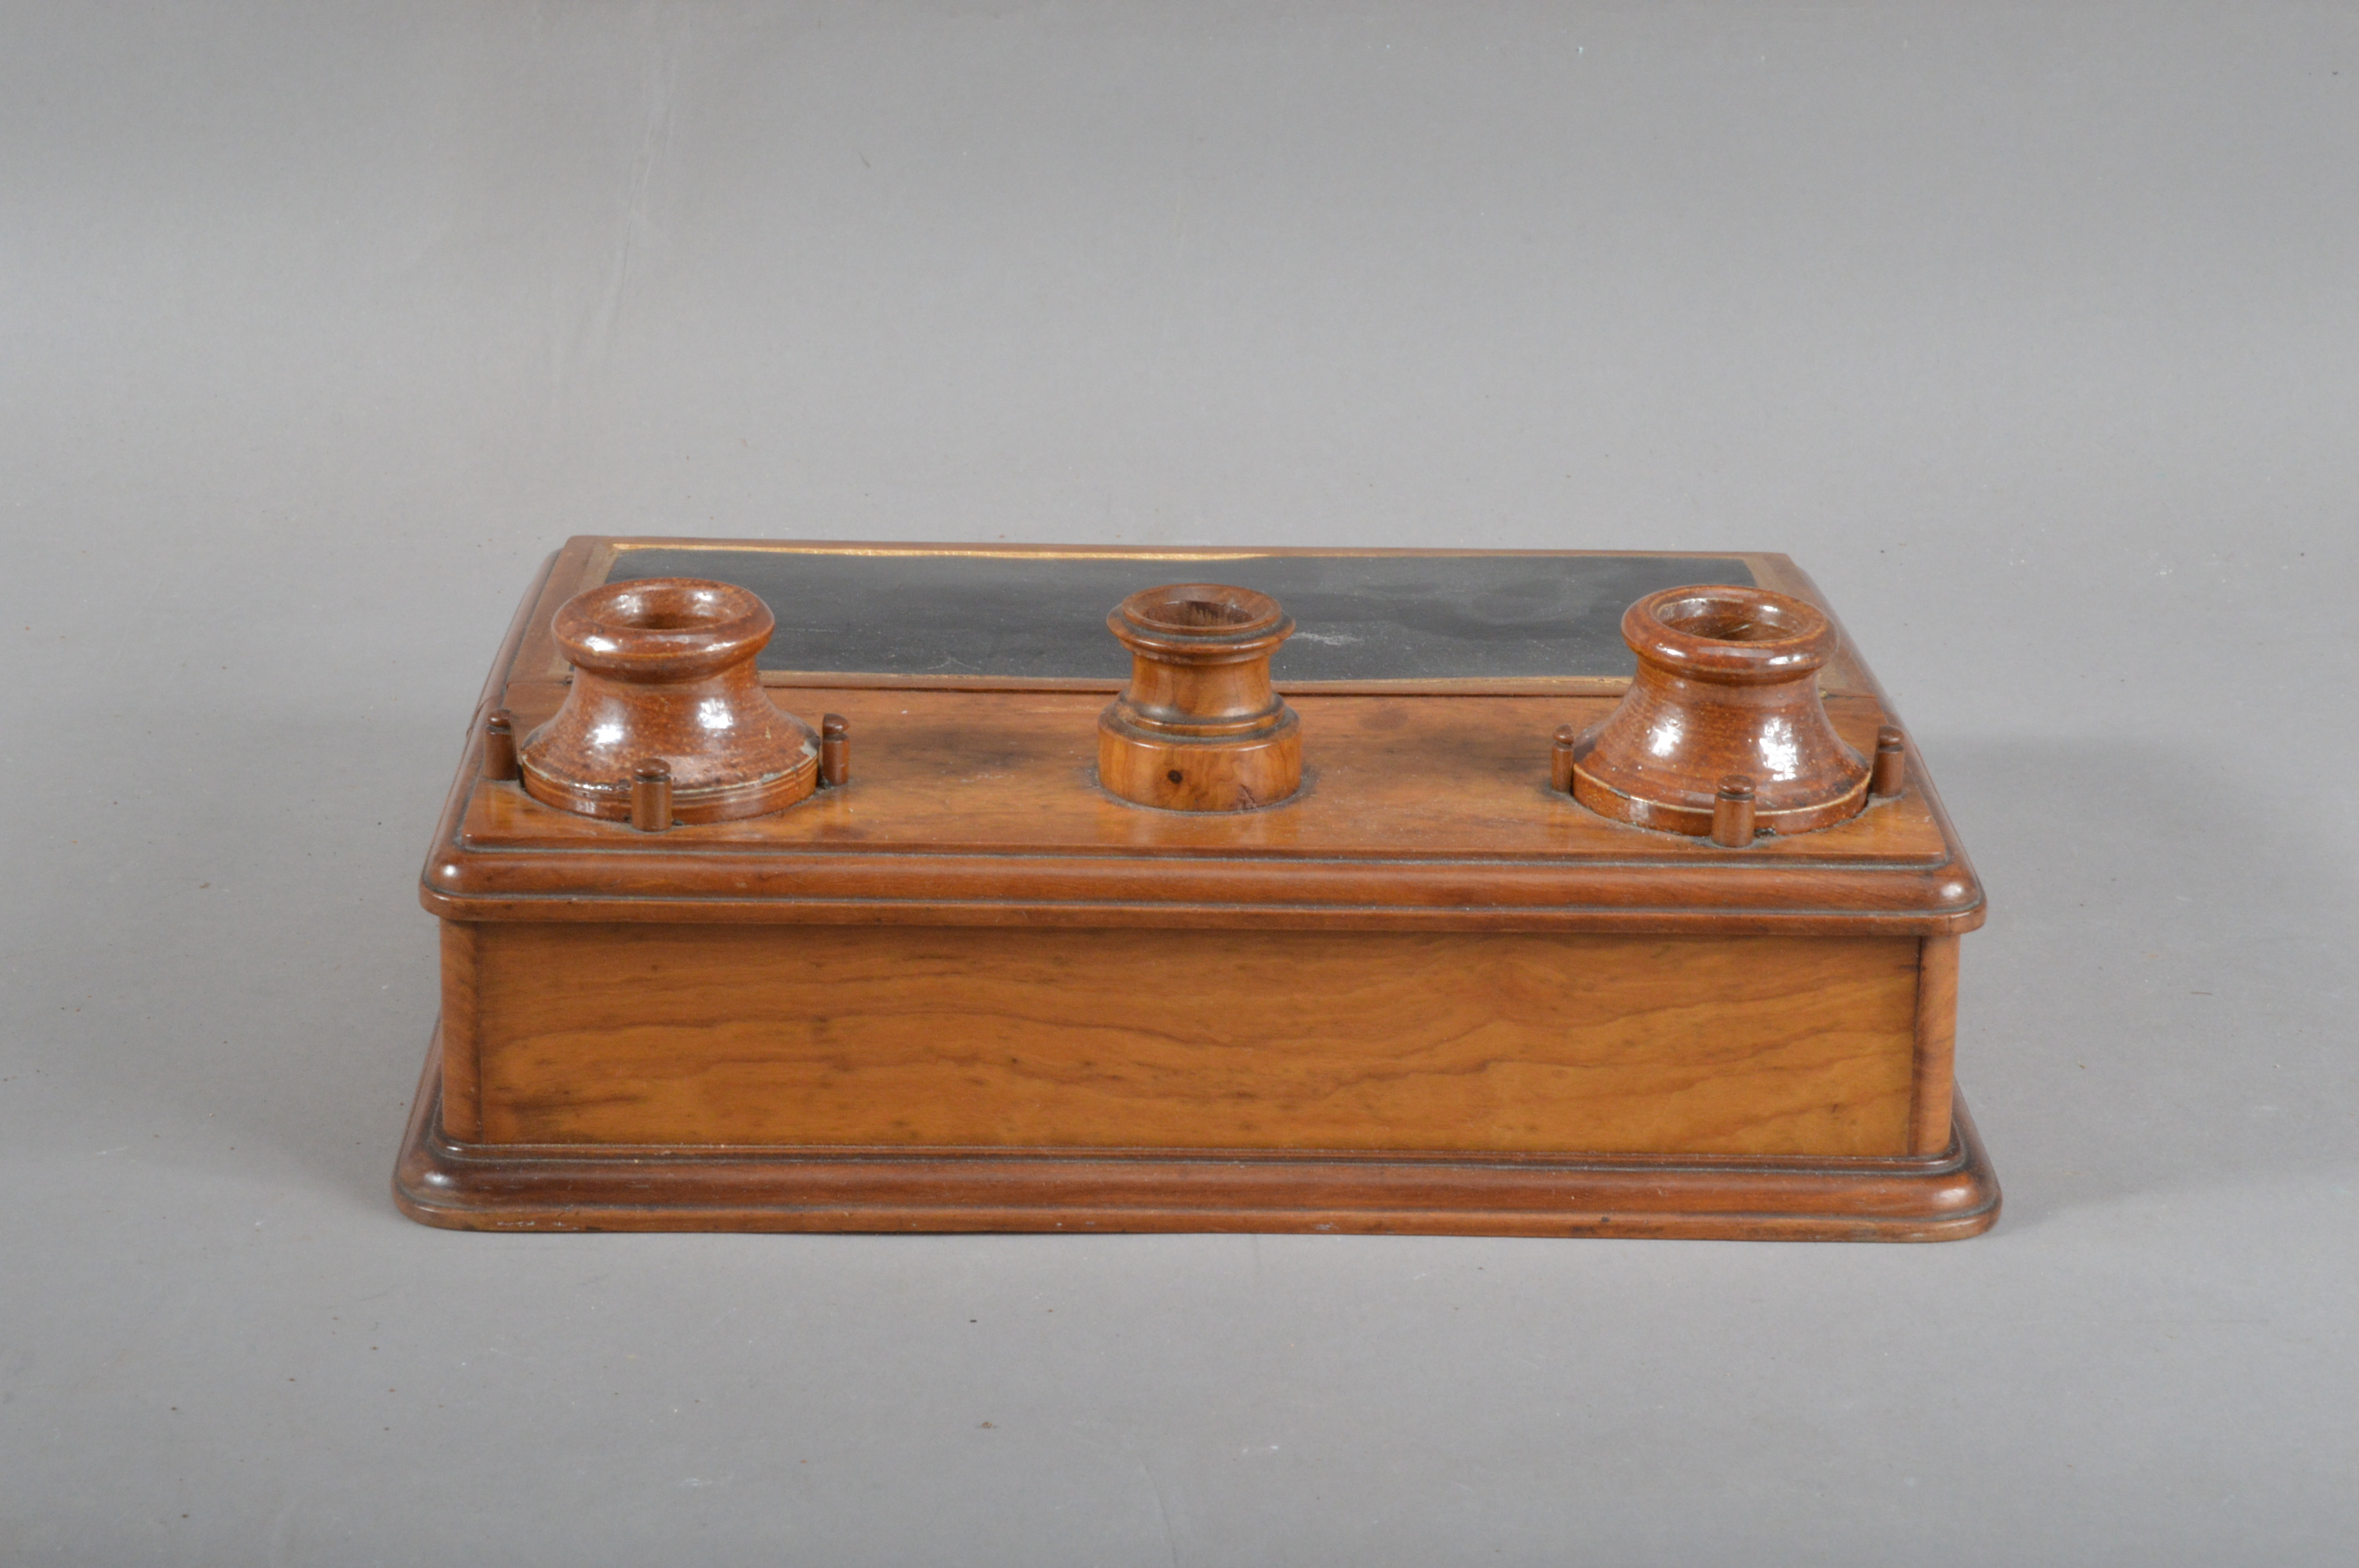 A 19th century olivewood and stoneware inkwell, two removable stoneware inkwells with a central - Image 3 of 4